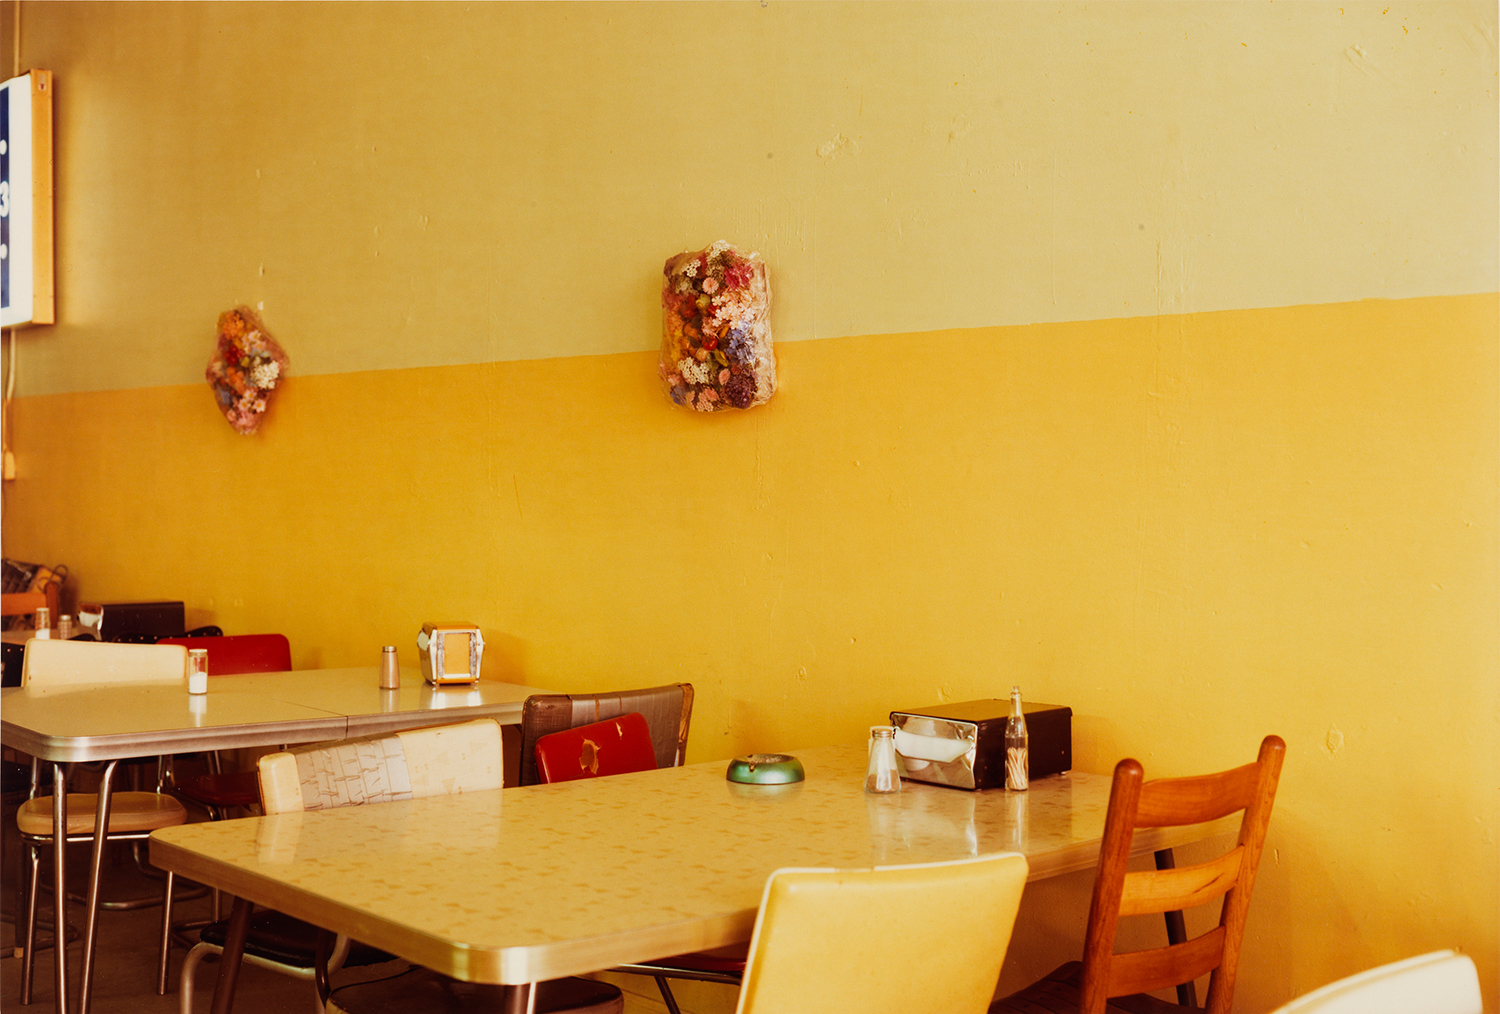 William Eggleston, Untitled, 1976; from the series Election Eve, with the recipe: William Eggleston's Cheese Grits Casserole.